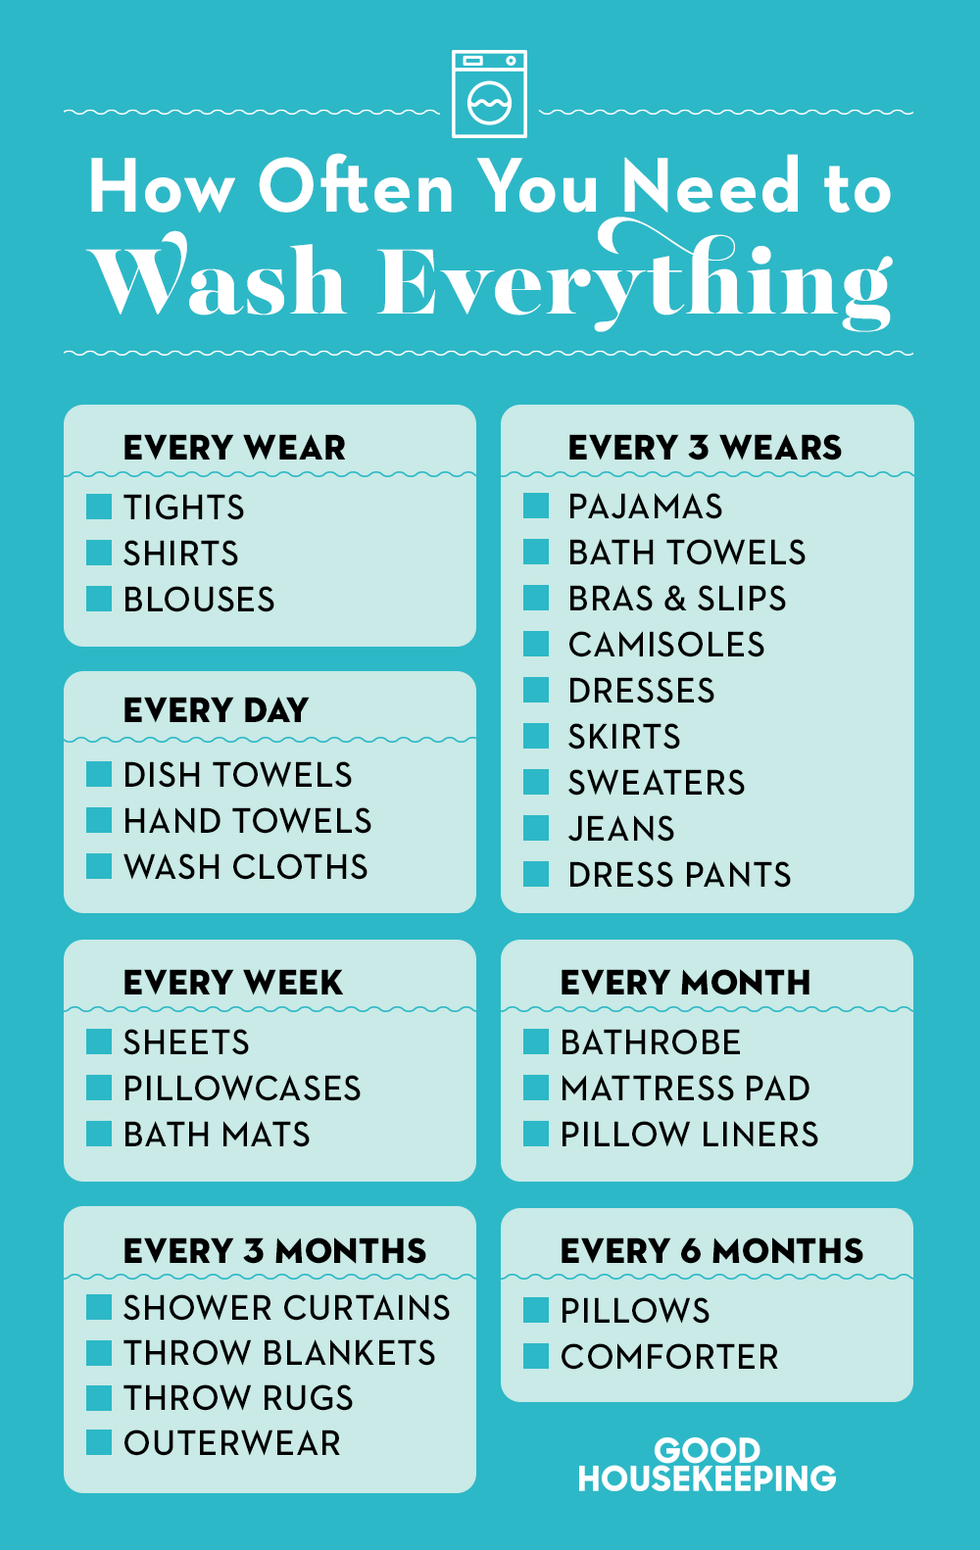 https://cdn.shopify.com/s/files/1/0013/1206/3534/files/how-often-to-wash-clothes-1586285915.png